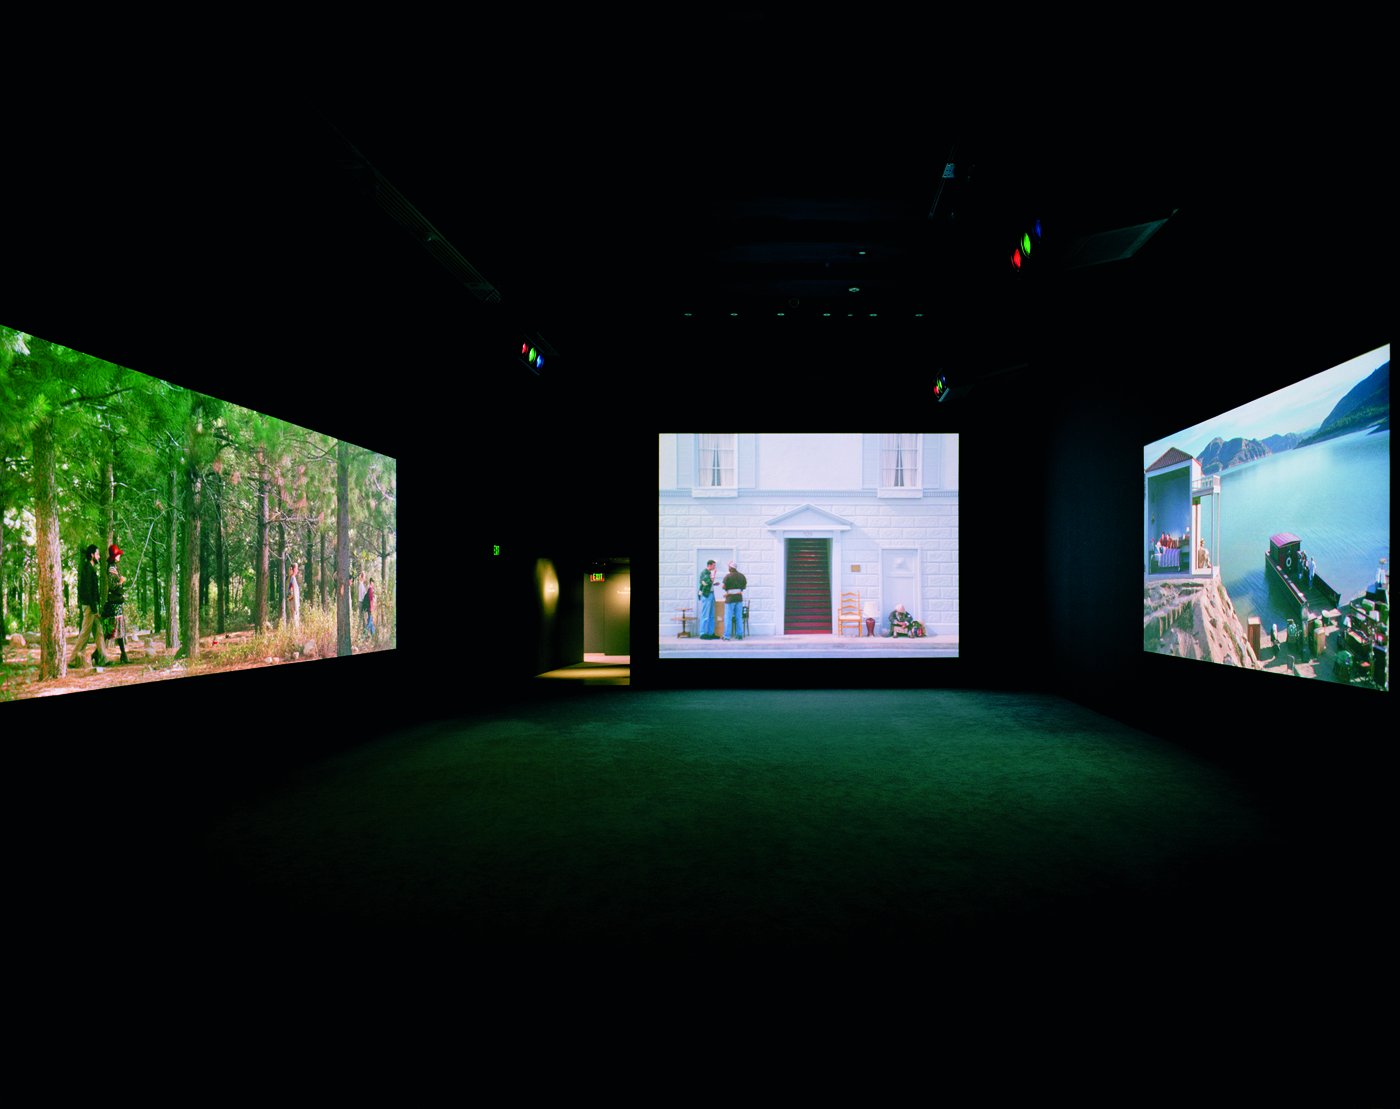 Video installation of various people traversing through landscapes showing how vessels move the human body.